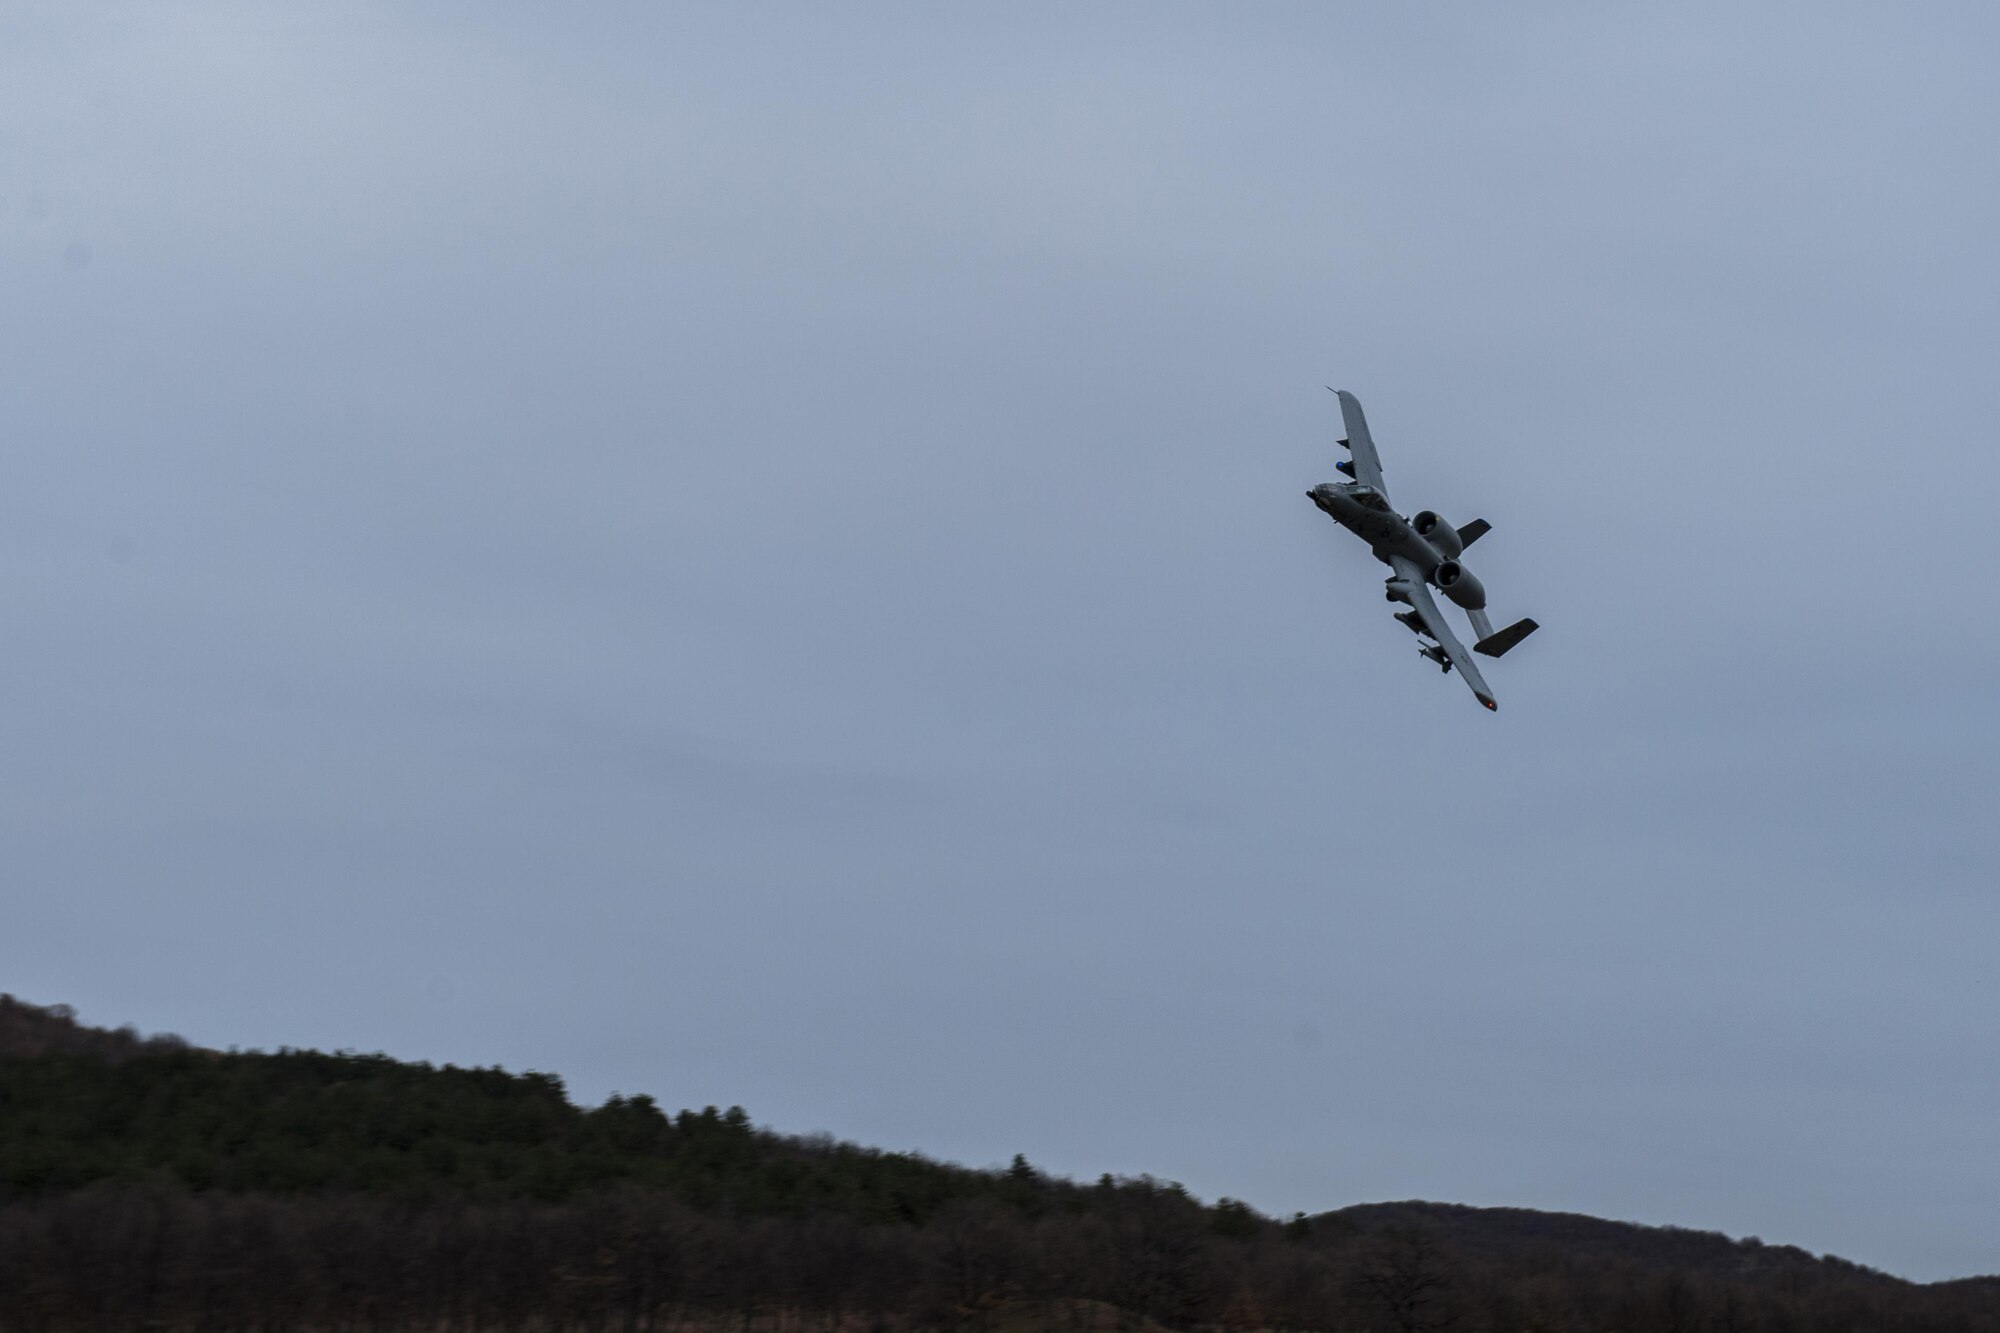 PLOVDIV, Bulgaria - A 74th Expeditionary Fighter Squadron A-10C Thunderbolt II aircraft soars through the air during combat search and rescue training near Plovdiv, Bulgaria, Feb. 11, 2016. The aircraft provided close air support for a survivor on the ground. (U.S. Air Force photo by Airman 1st Class Luke Kitterman/Released)